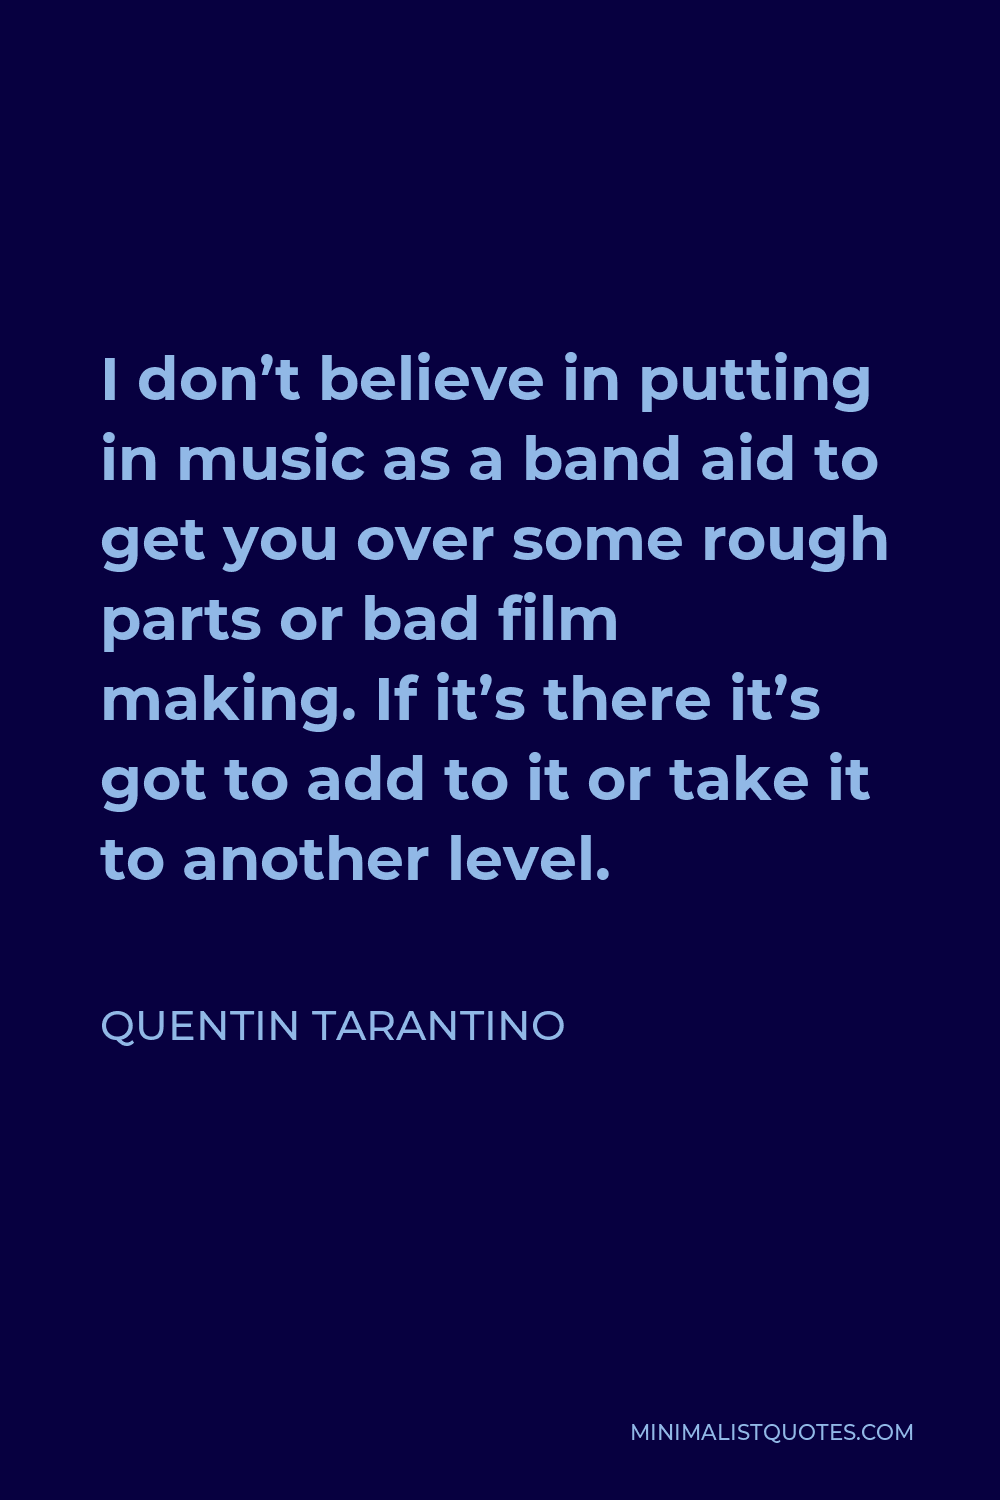 Quentin Tarantino Quote - I don’t believe in putting in music as a band aid to get you over some rough parts or bad film making. If it’s there it’s got to add to it or take it to another level.